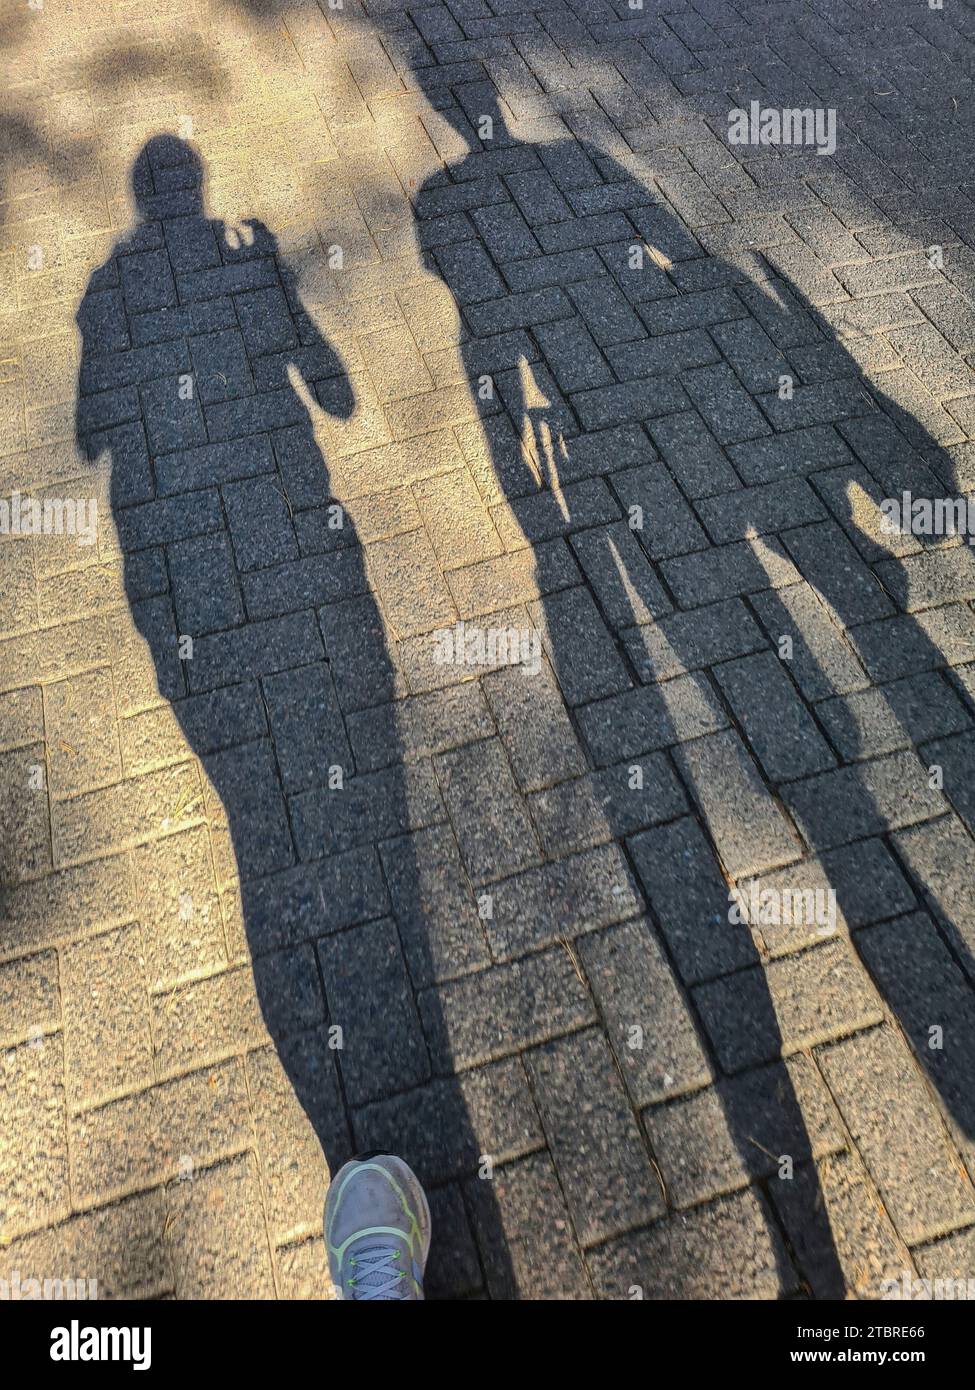 Teenagers and young people take pictures with smartphone of their long shadows on the street in summer evening light, Prerow, Fischland-Darß-Zingst peninsula, Mecklenburg-Western Pomerania, Germany Stock Photo